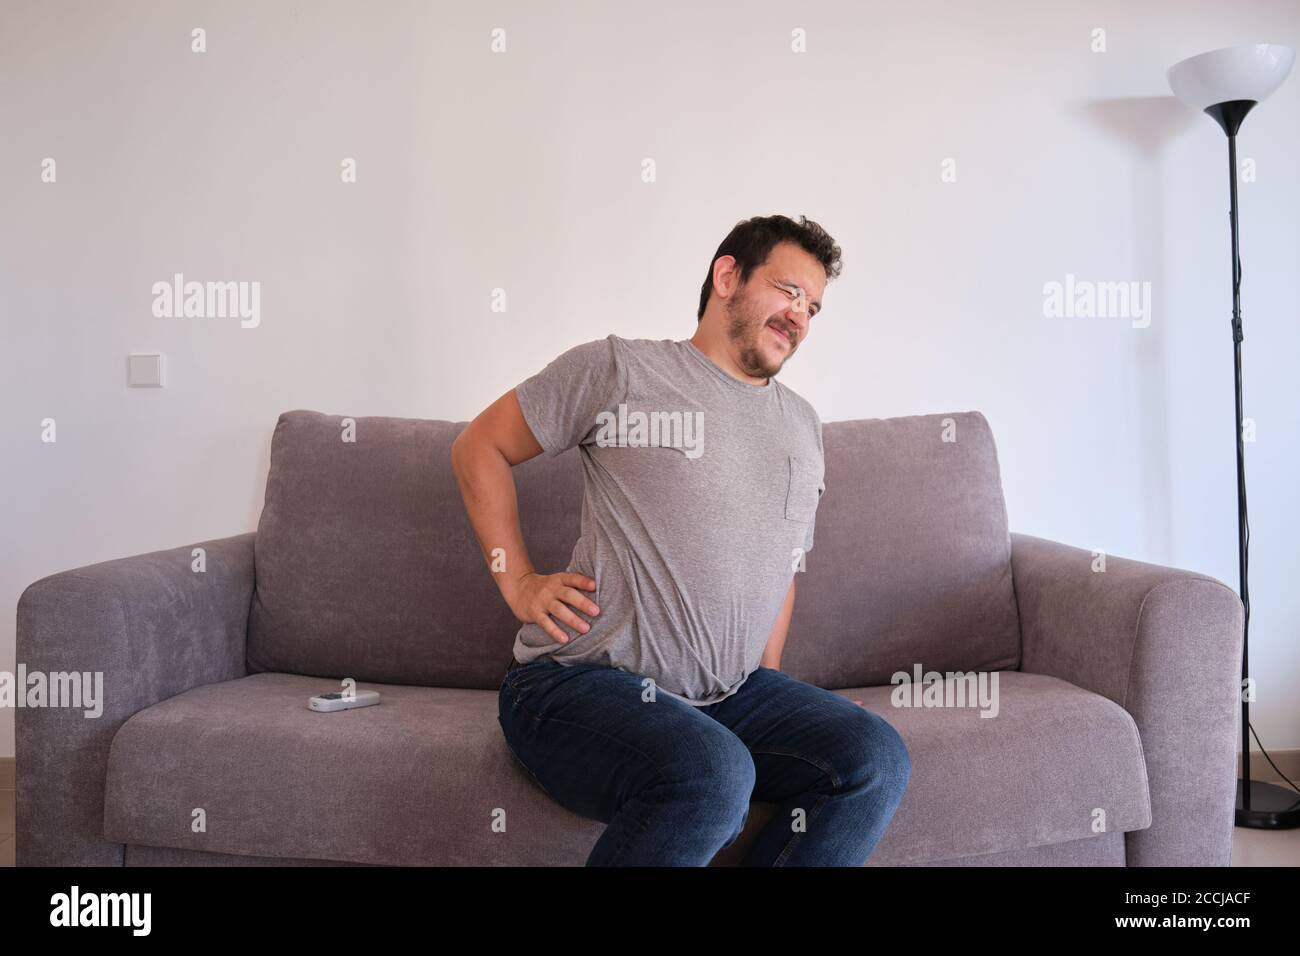 Young man sitting on a sofa suffering from low back pain. Backache concept. Stock Photo